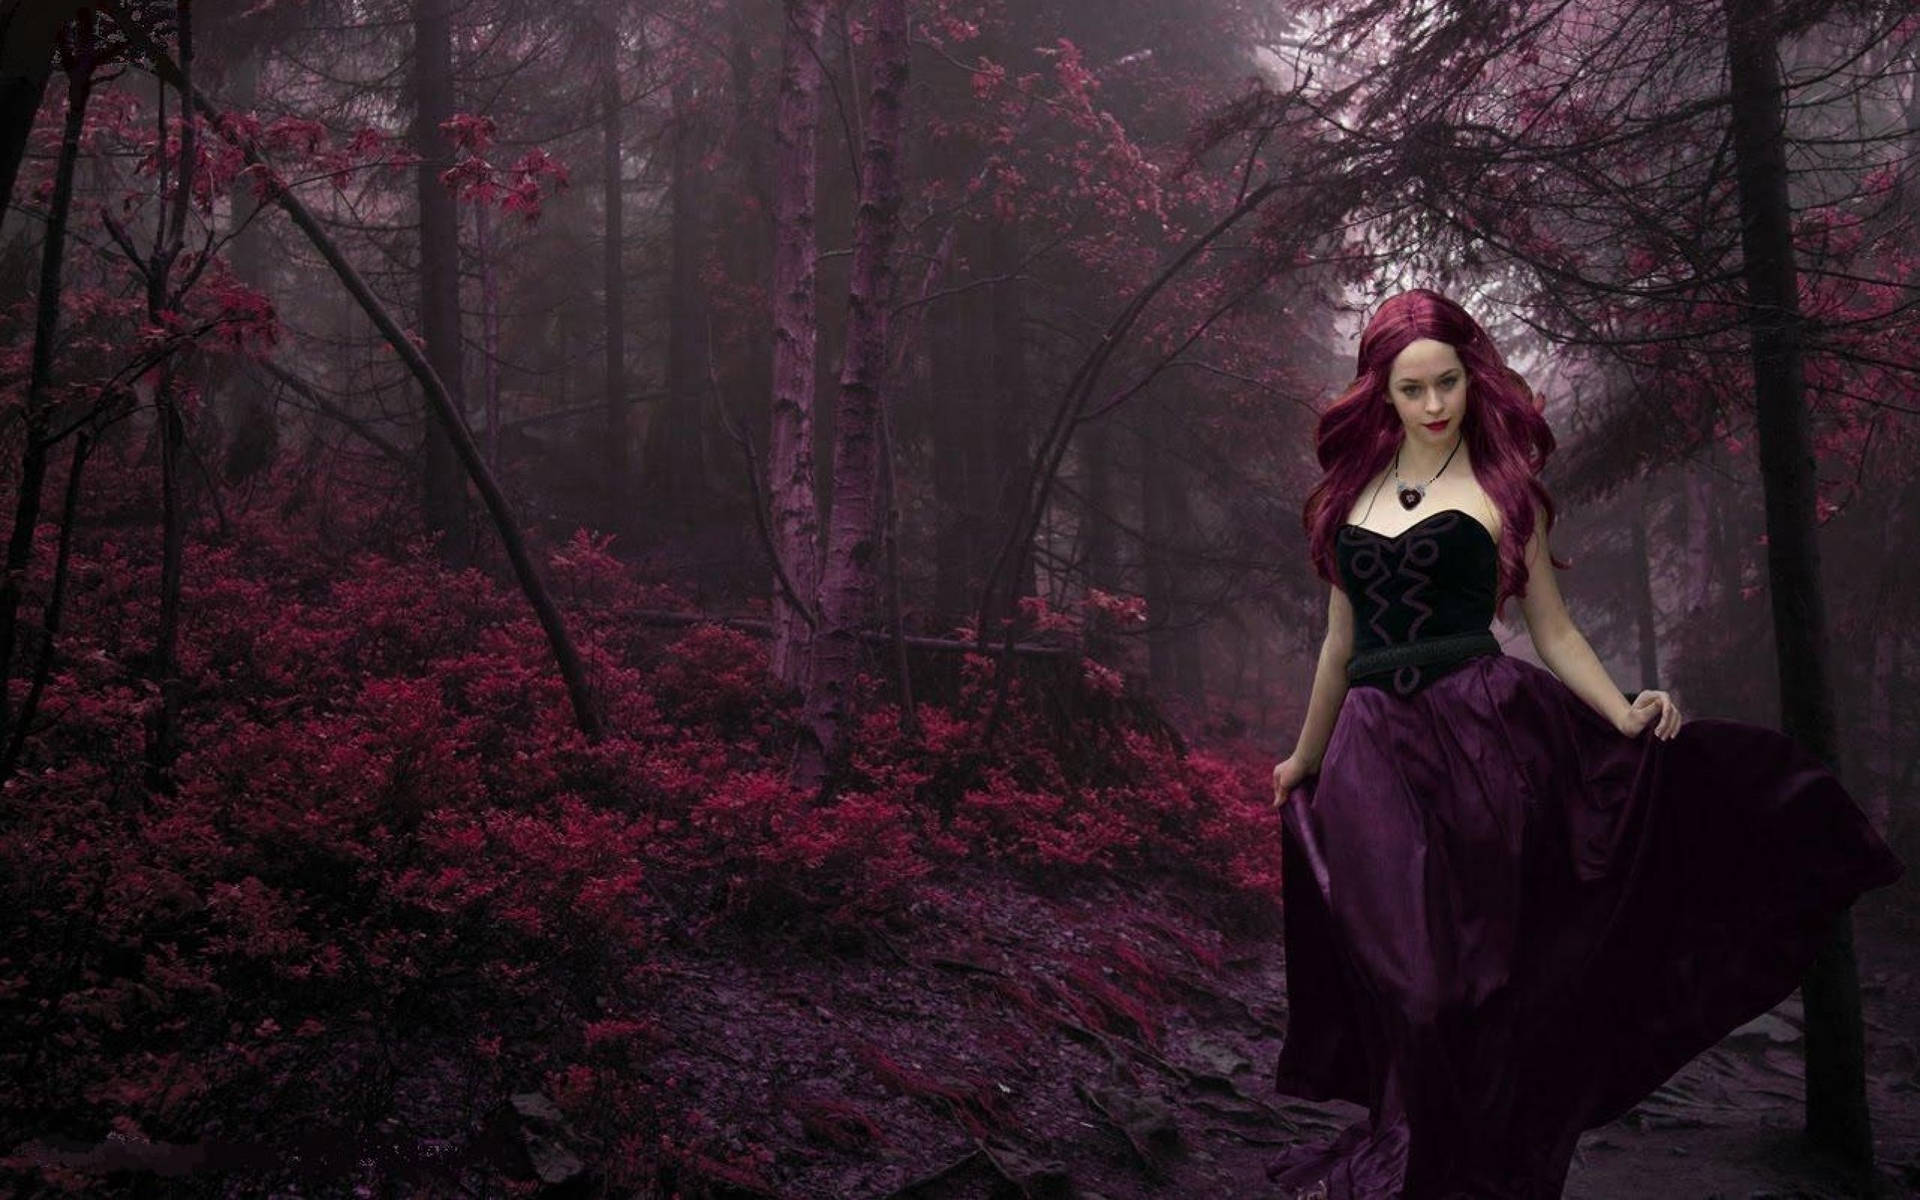 Mysterious Gothic Girl in a Dark Purple Forest Wallpaper